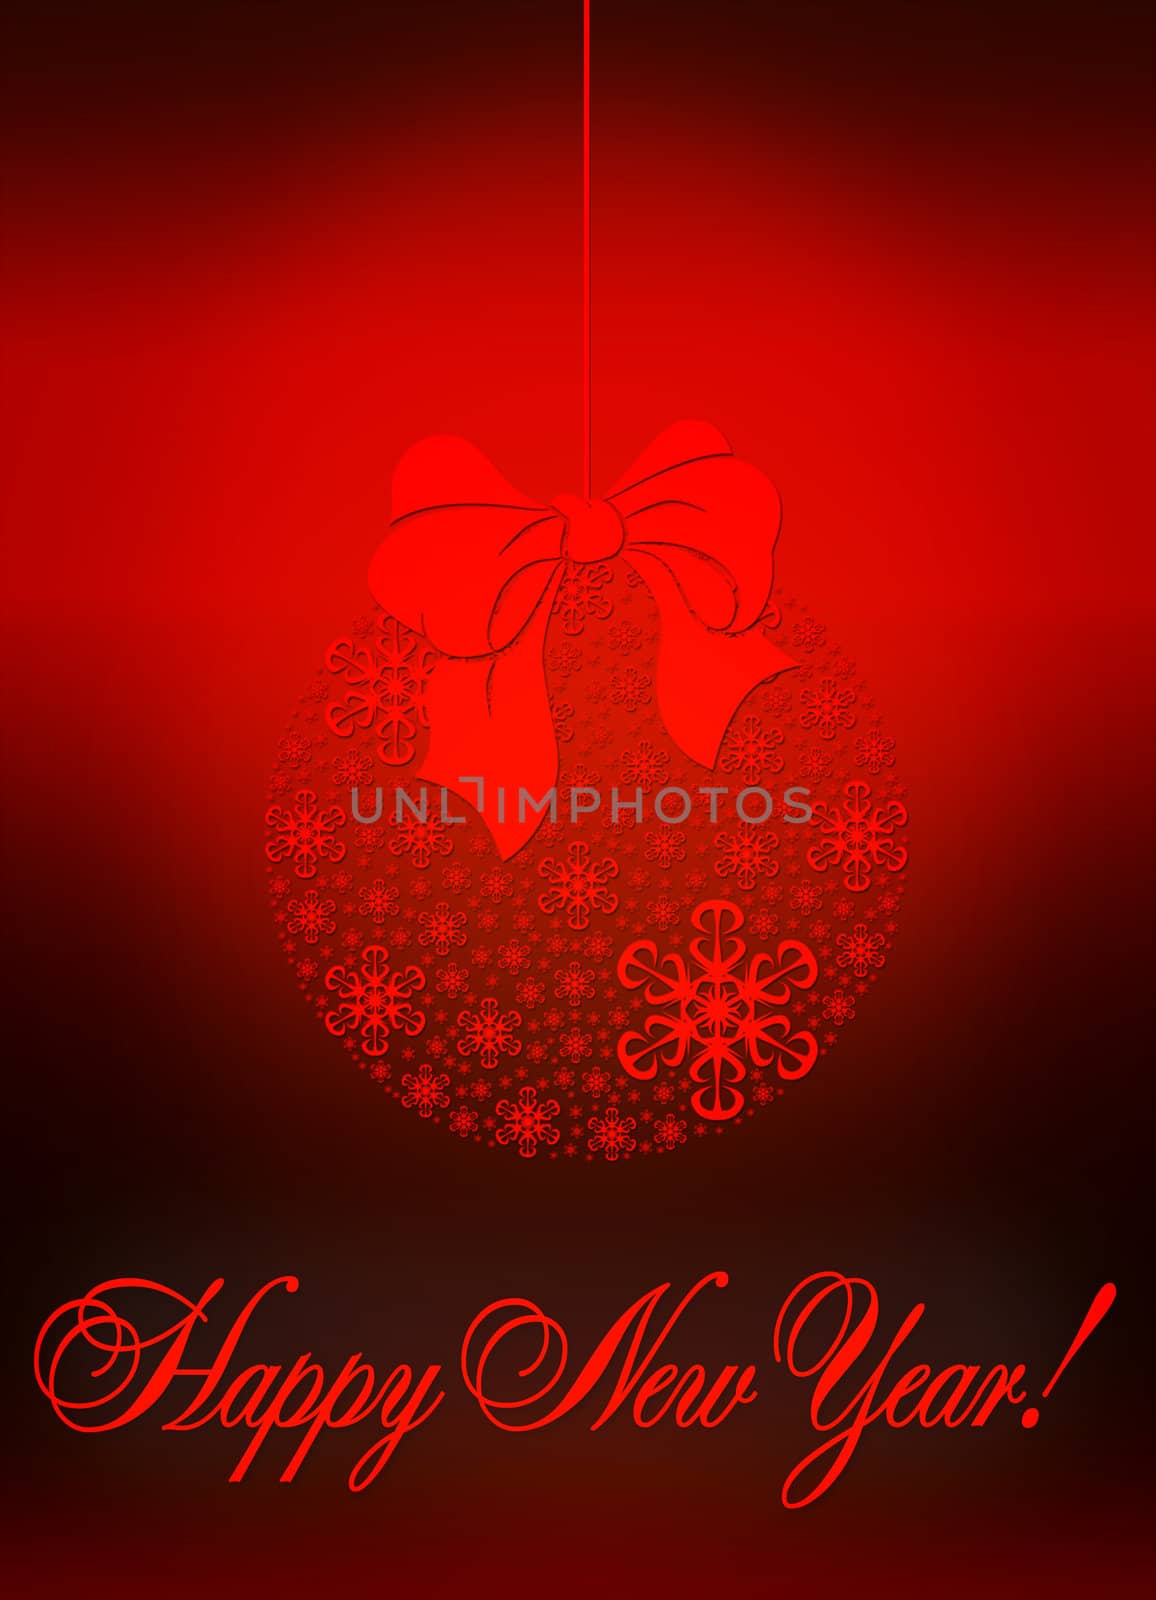 2012 Happy New Year greeting card or background